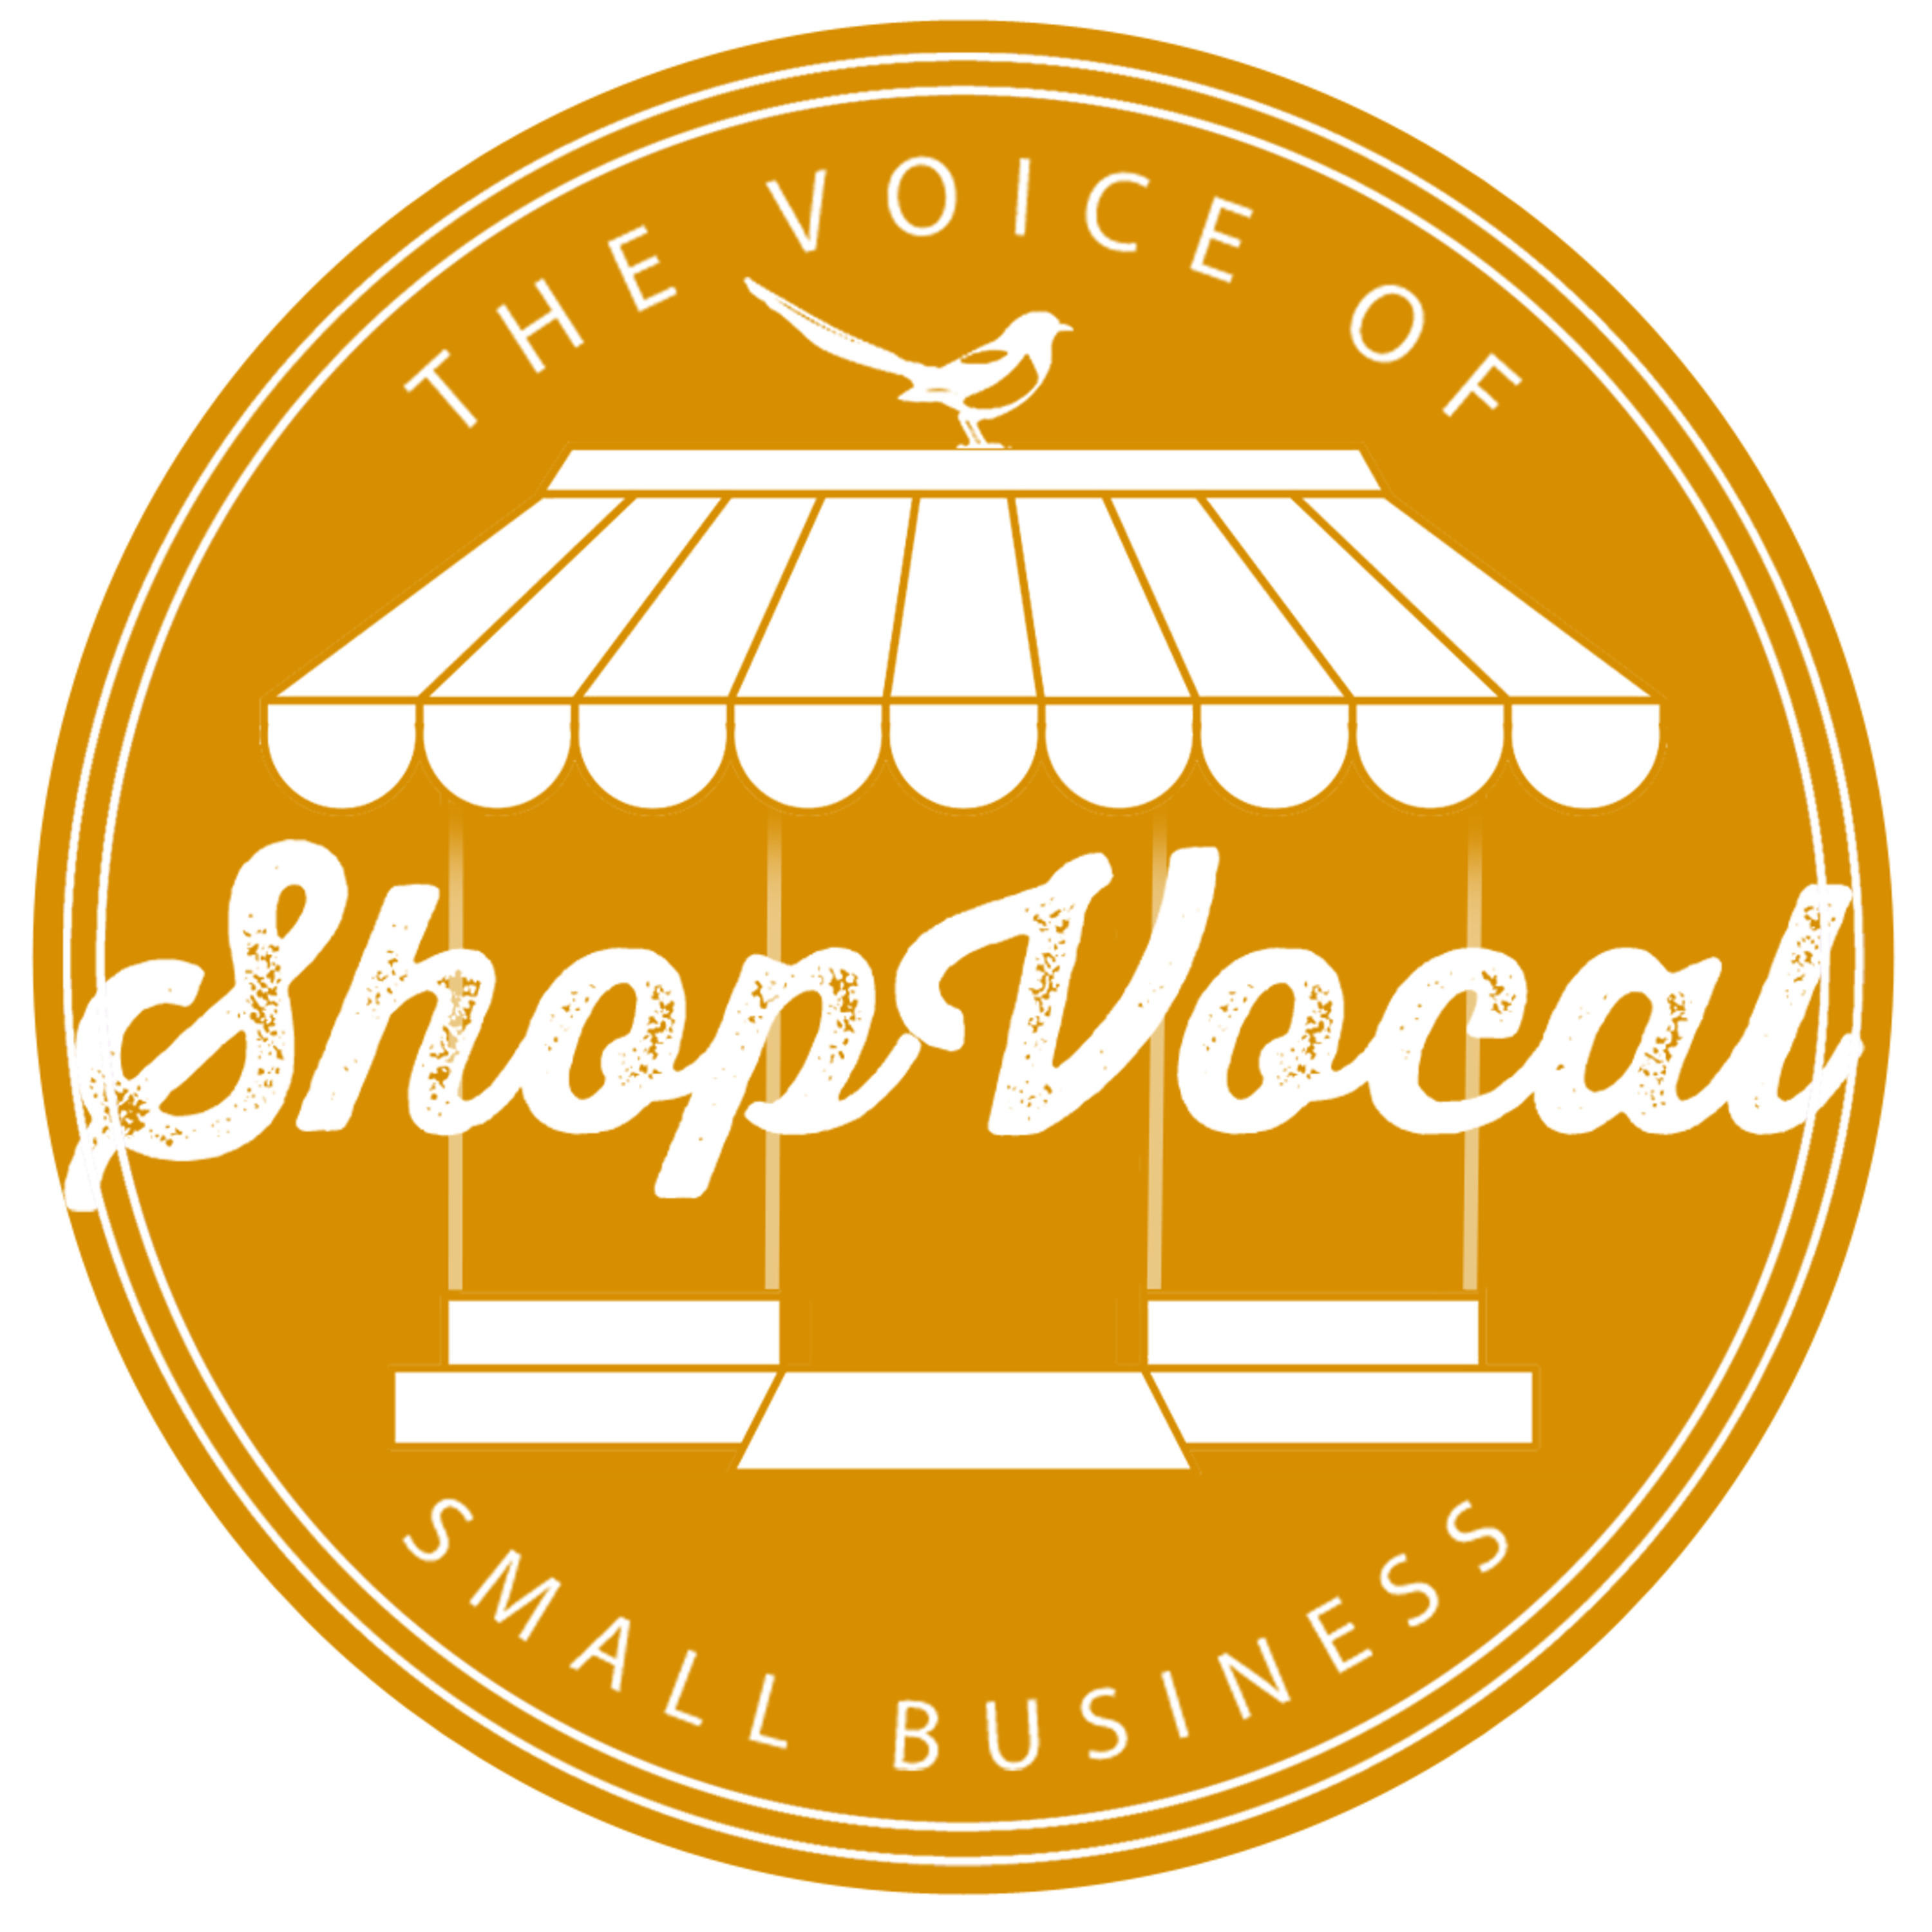 Shop Vocal - Small Business Stories